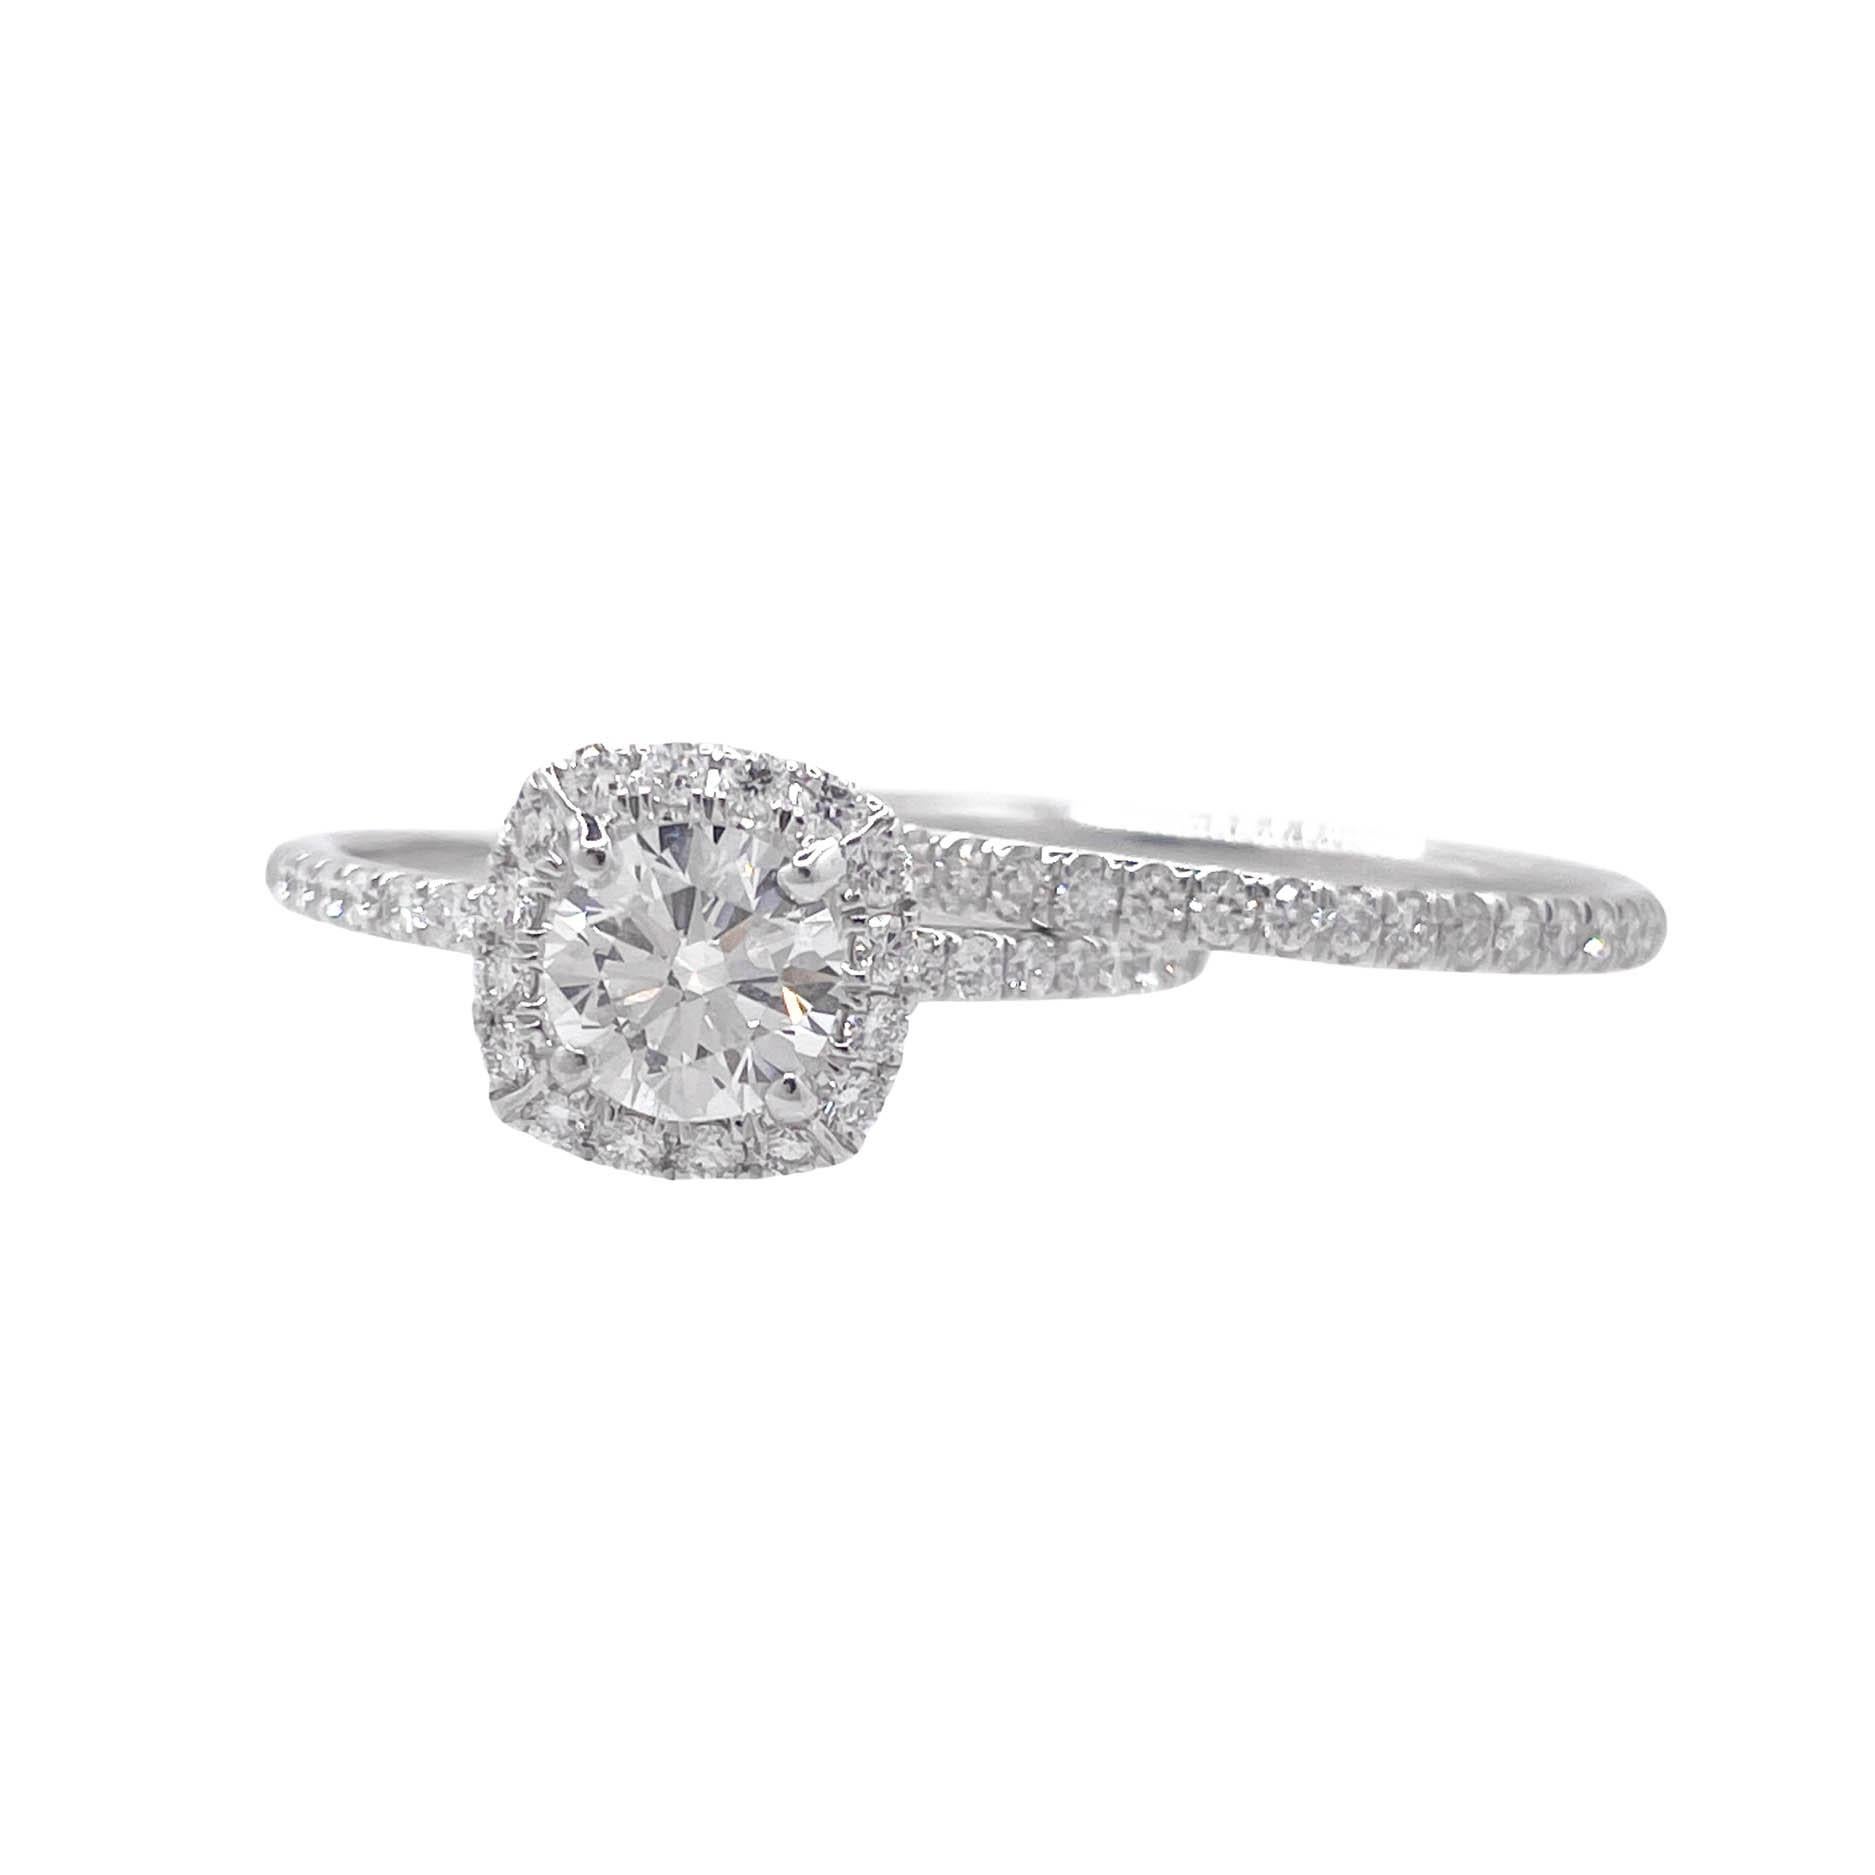 GIA Certified 1.28ctw Round Diamond Pave Halo Engagement Wedding Ring Set 
Set with GIA certified 0.90ct Round brilliant cut diamond in the center in H color and SI1 clarity; with measurements of 6.14x6.18x3.78mm. GIA report # 2446947901. The center